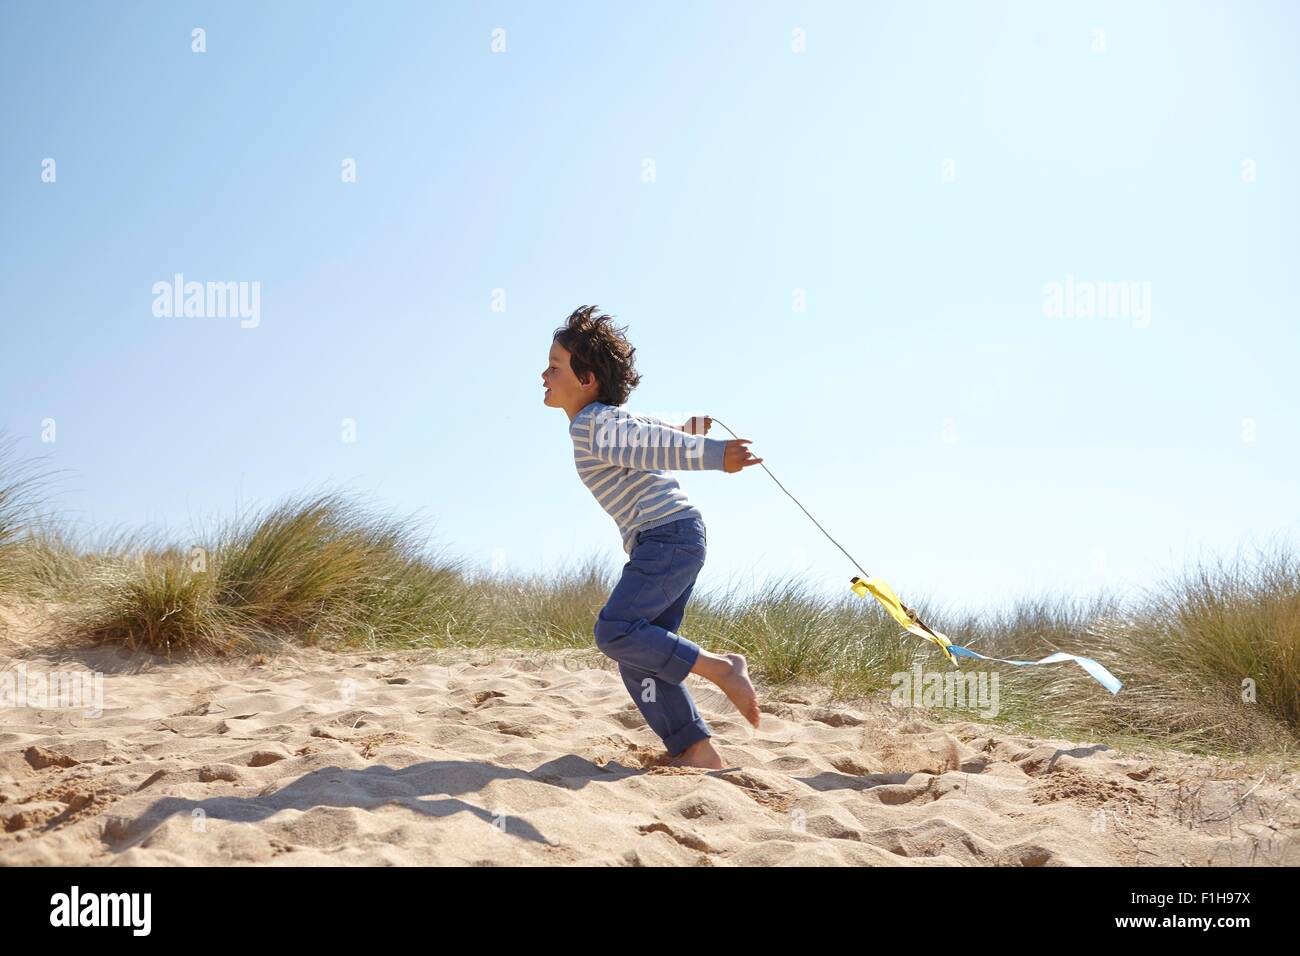 Young boy flying kite on beach Stock Photo